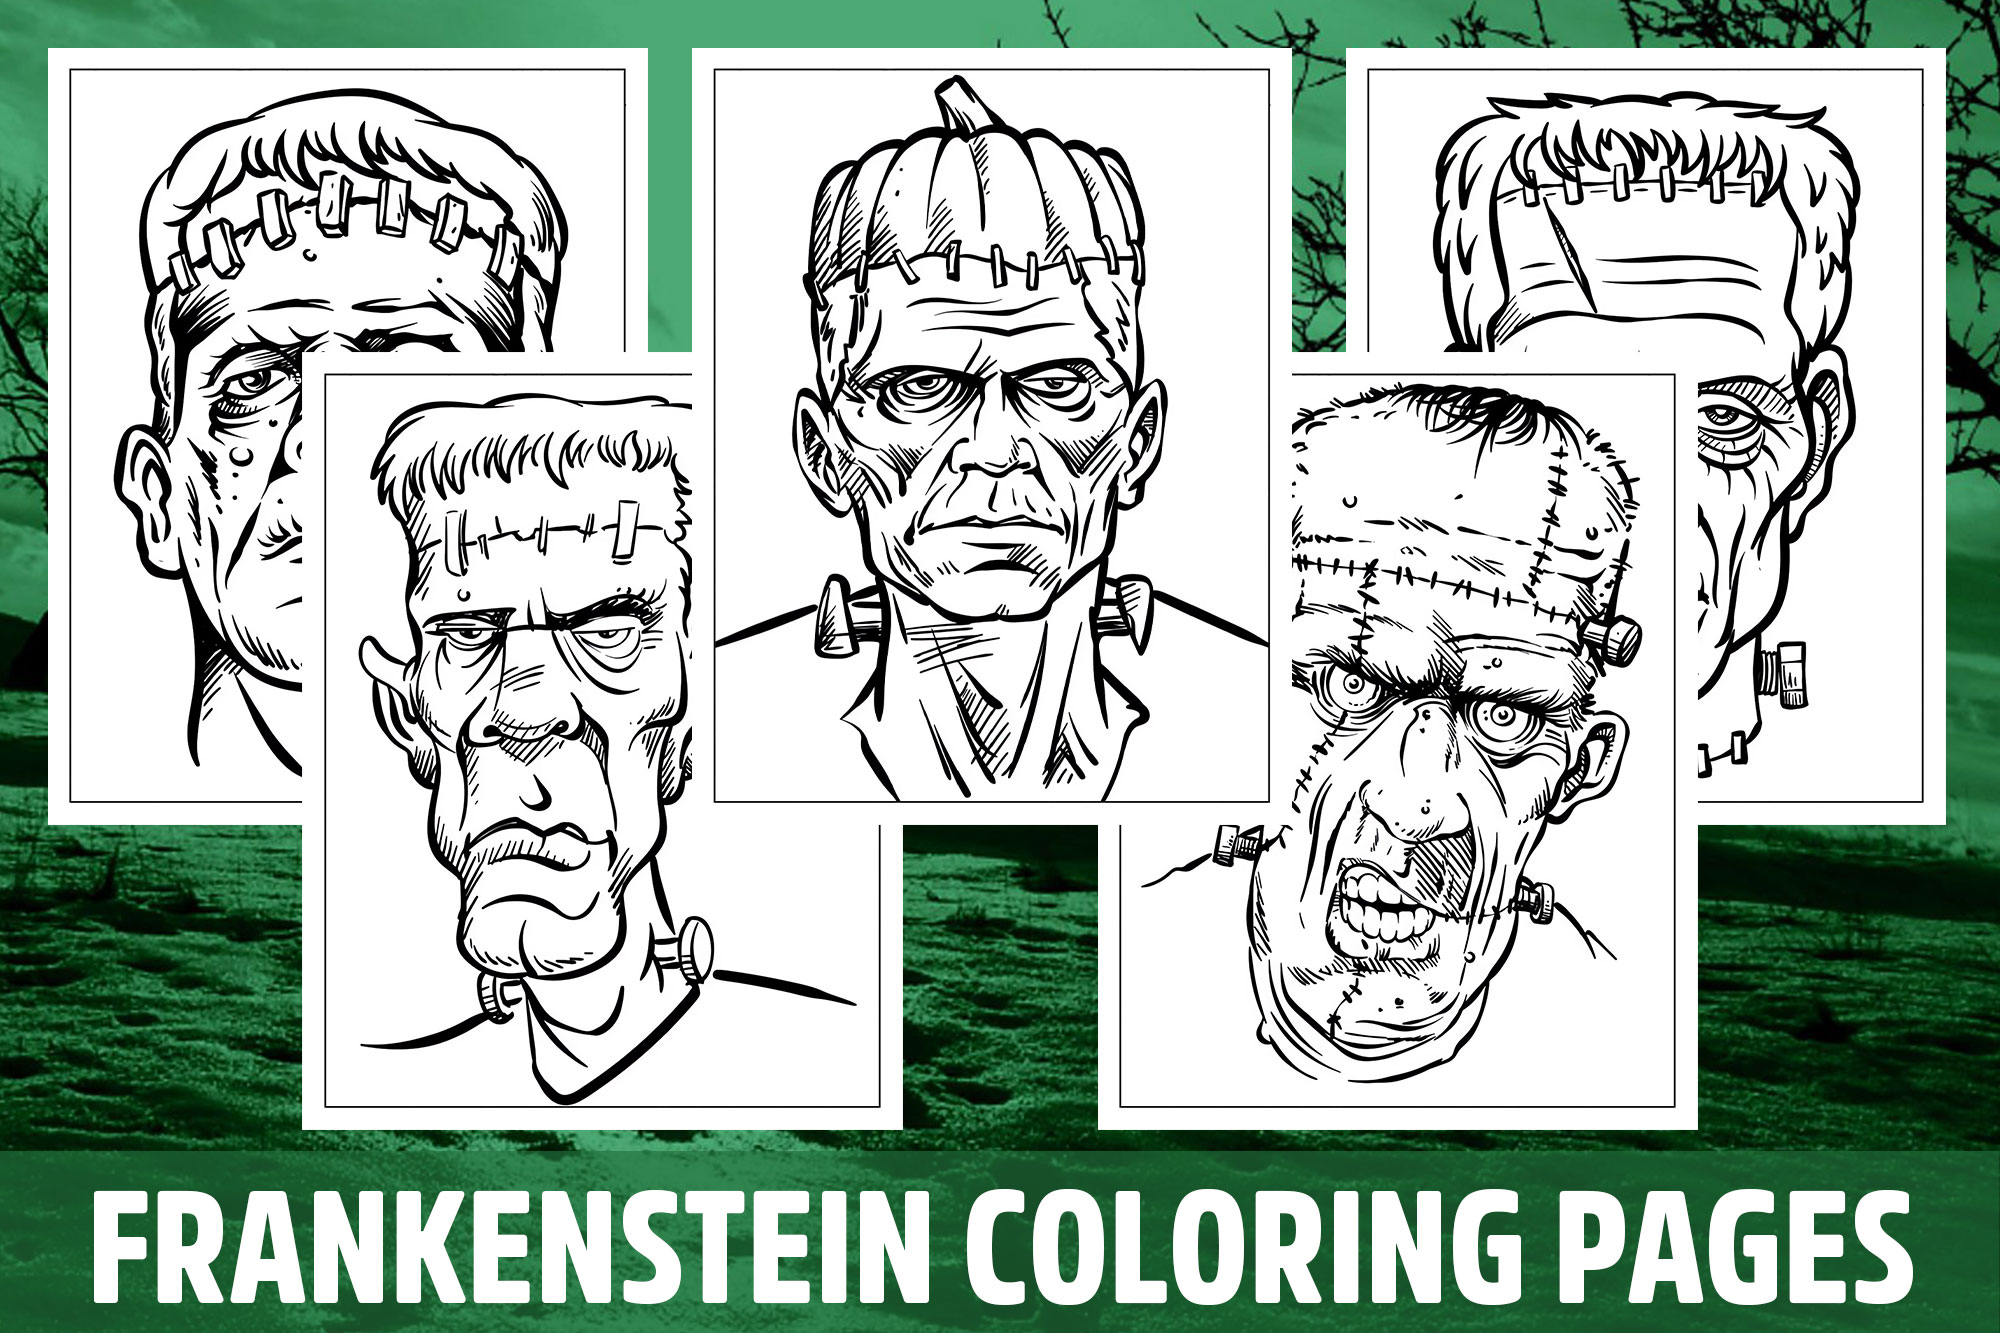 Frankenstein coloring pages for kids girls boys teens birthday school activity made by teachers